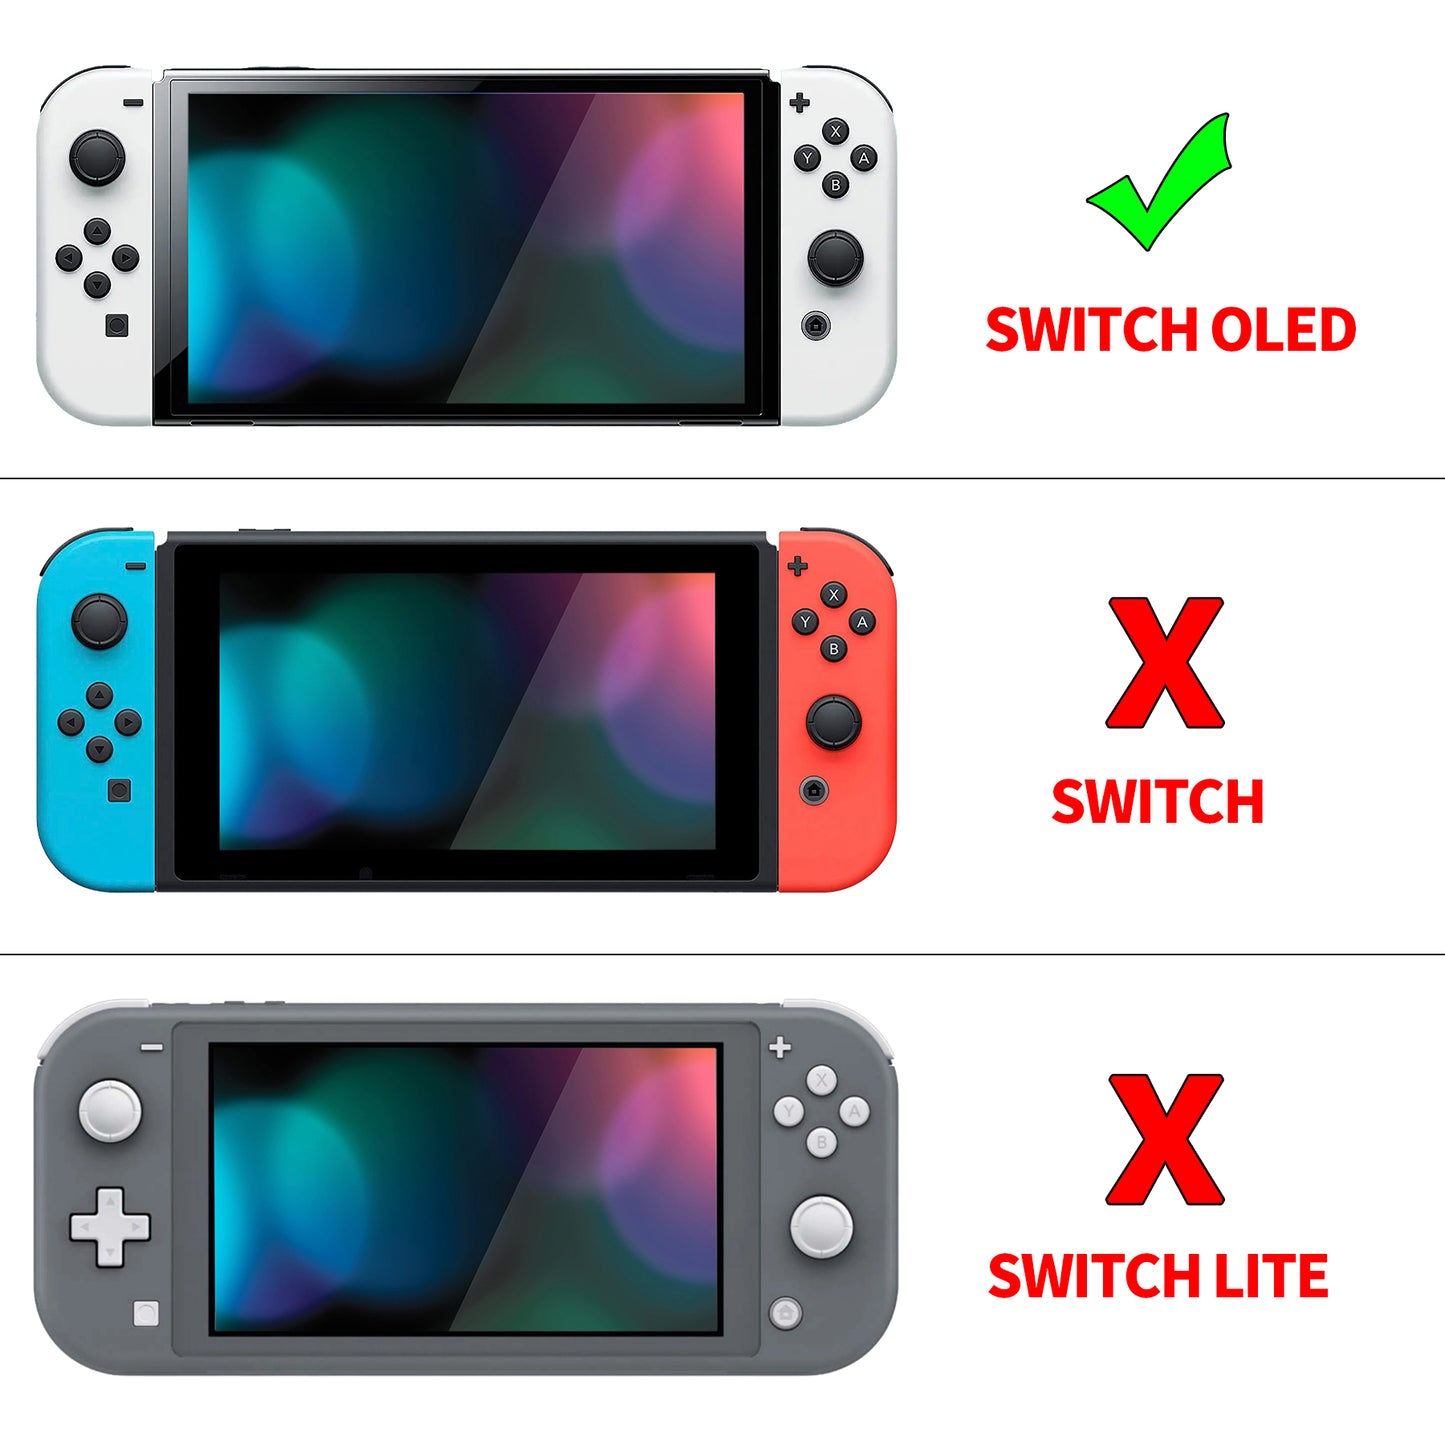 PlayVital ZealProtect Soft Protective Case for Switch OLED, Flexible Protector Joycon Grip Cover for Switch OLED with Thumb Grip Caps & ABXY Direction Button Caps - Slate Gray - XSOYM5011 playvital